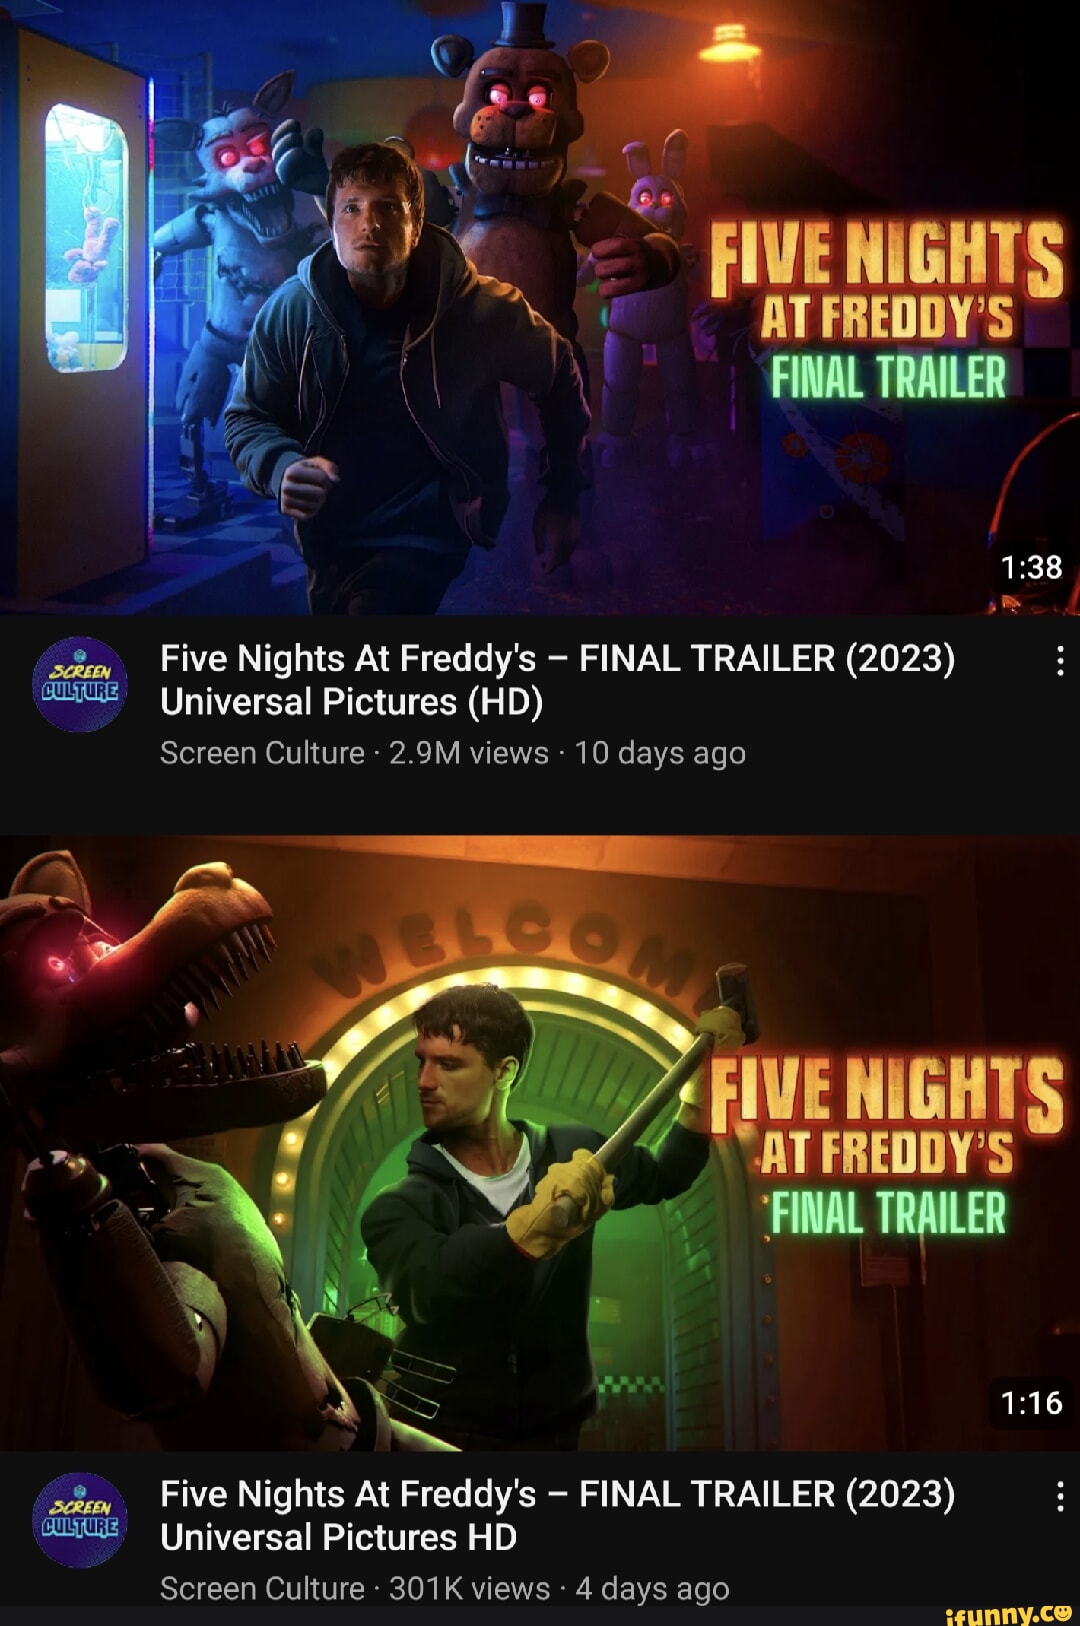 Five Nights at Freddy's - Official Trailer (2023), Universal Pictures